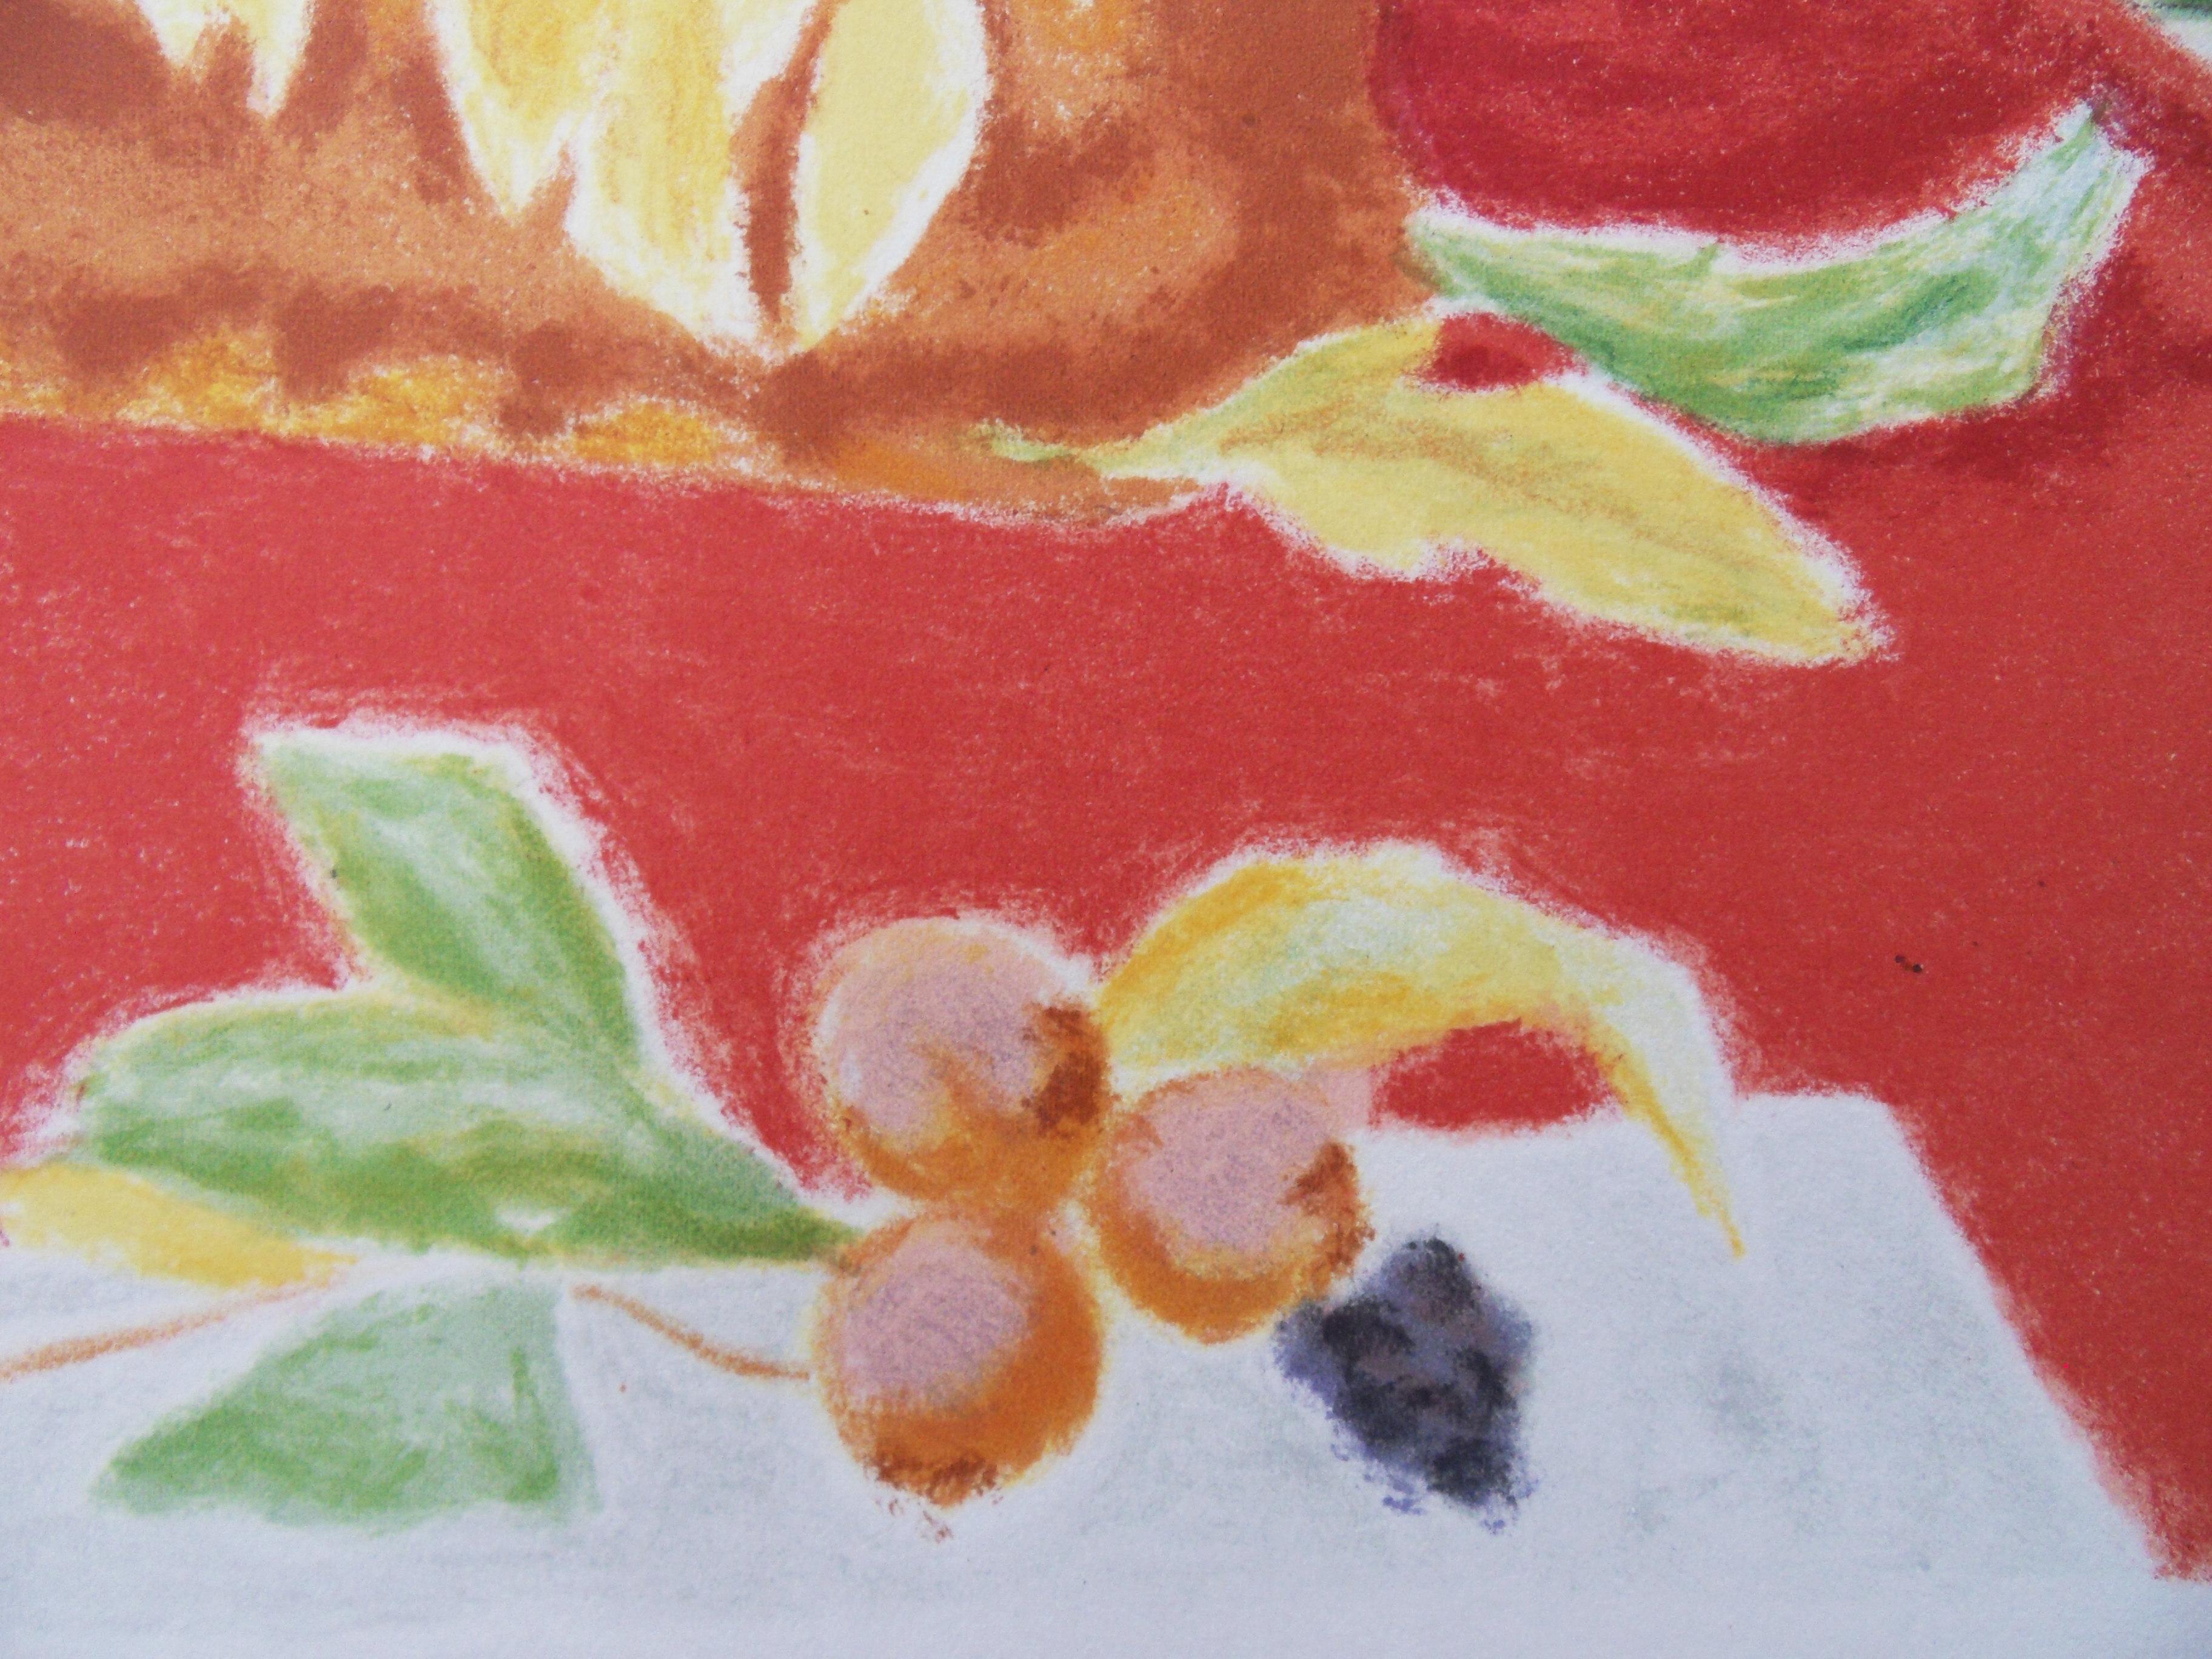 Fruits and Flowers on Red Background - Original lithograph, Handsigned - Post-Impressionist Print by Jules Cavailles